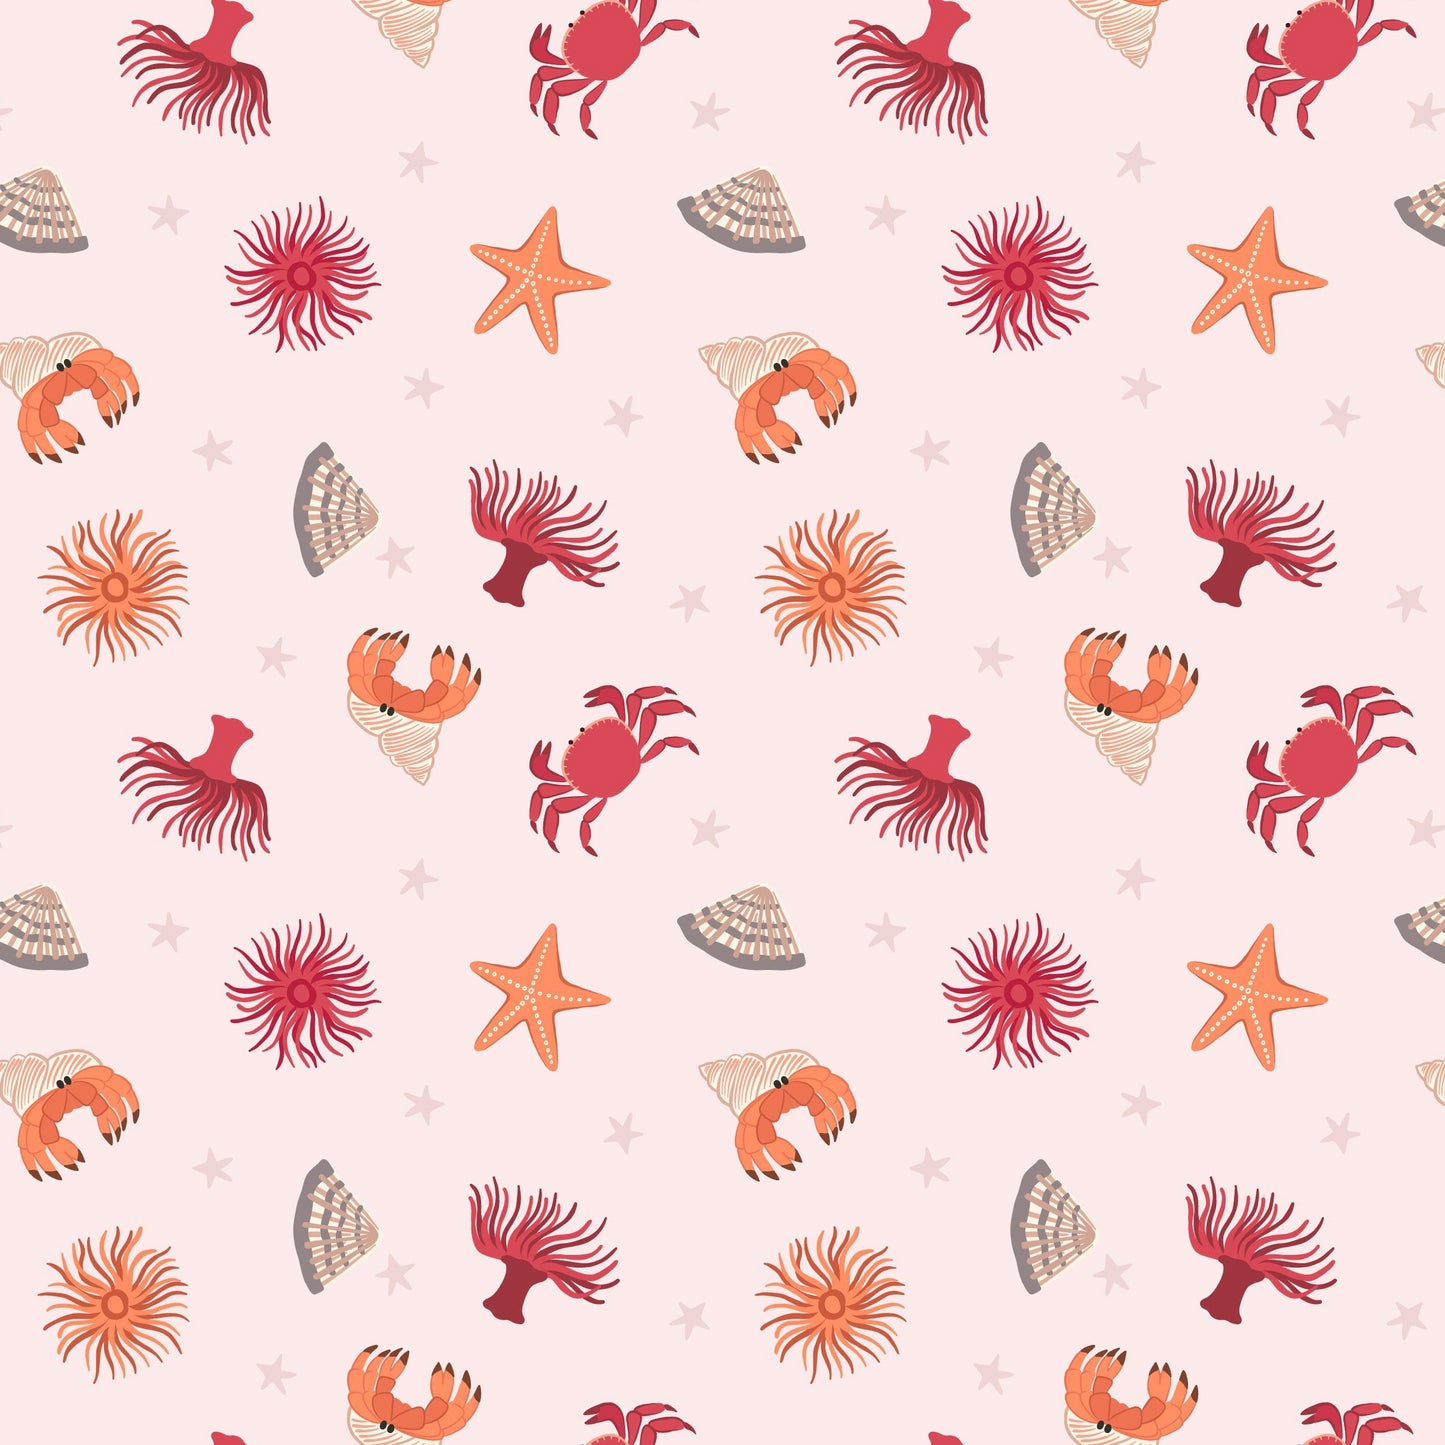 Small Things by the Sea - Rock Pool POS Fabric - Trapunto